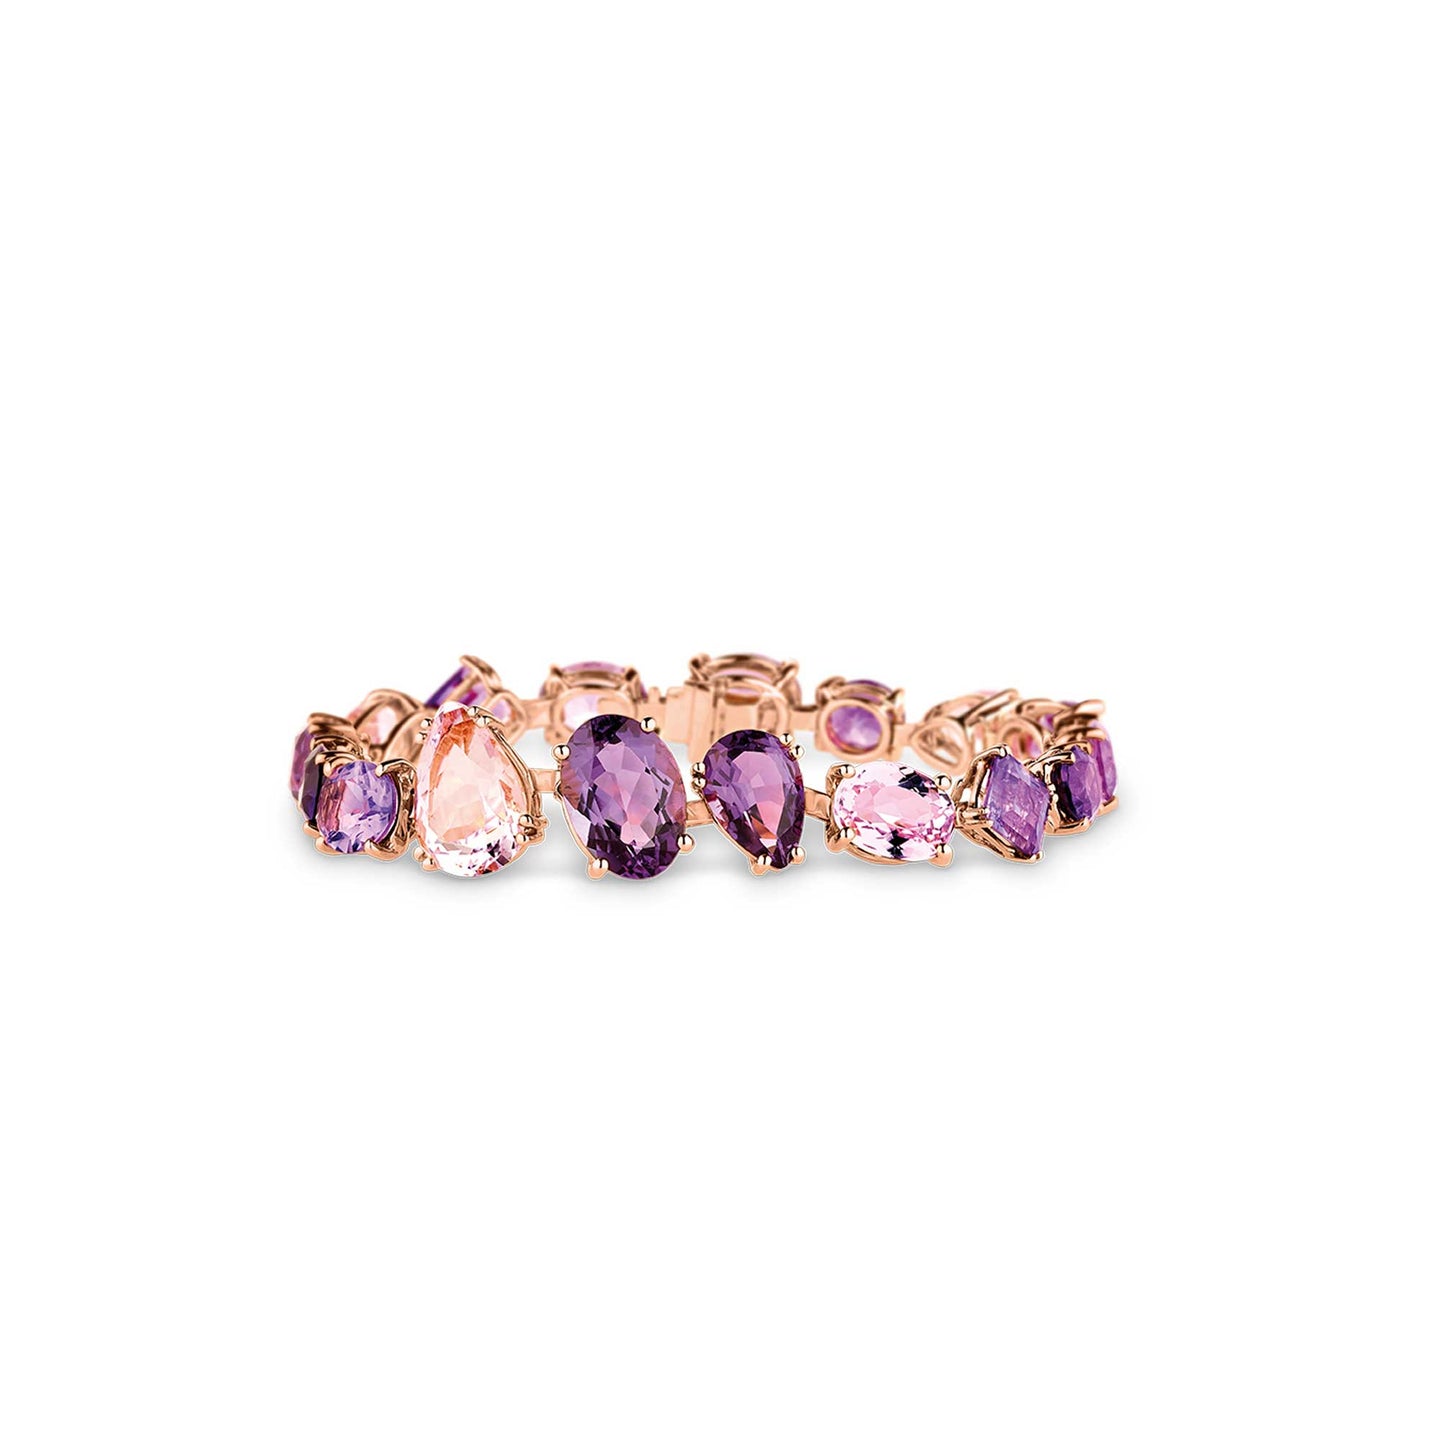 Chaos Bracelet in 18ct Rose Gold with Amethysts and Kunzites